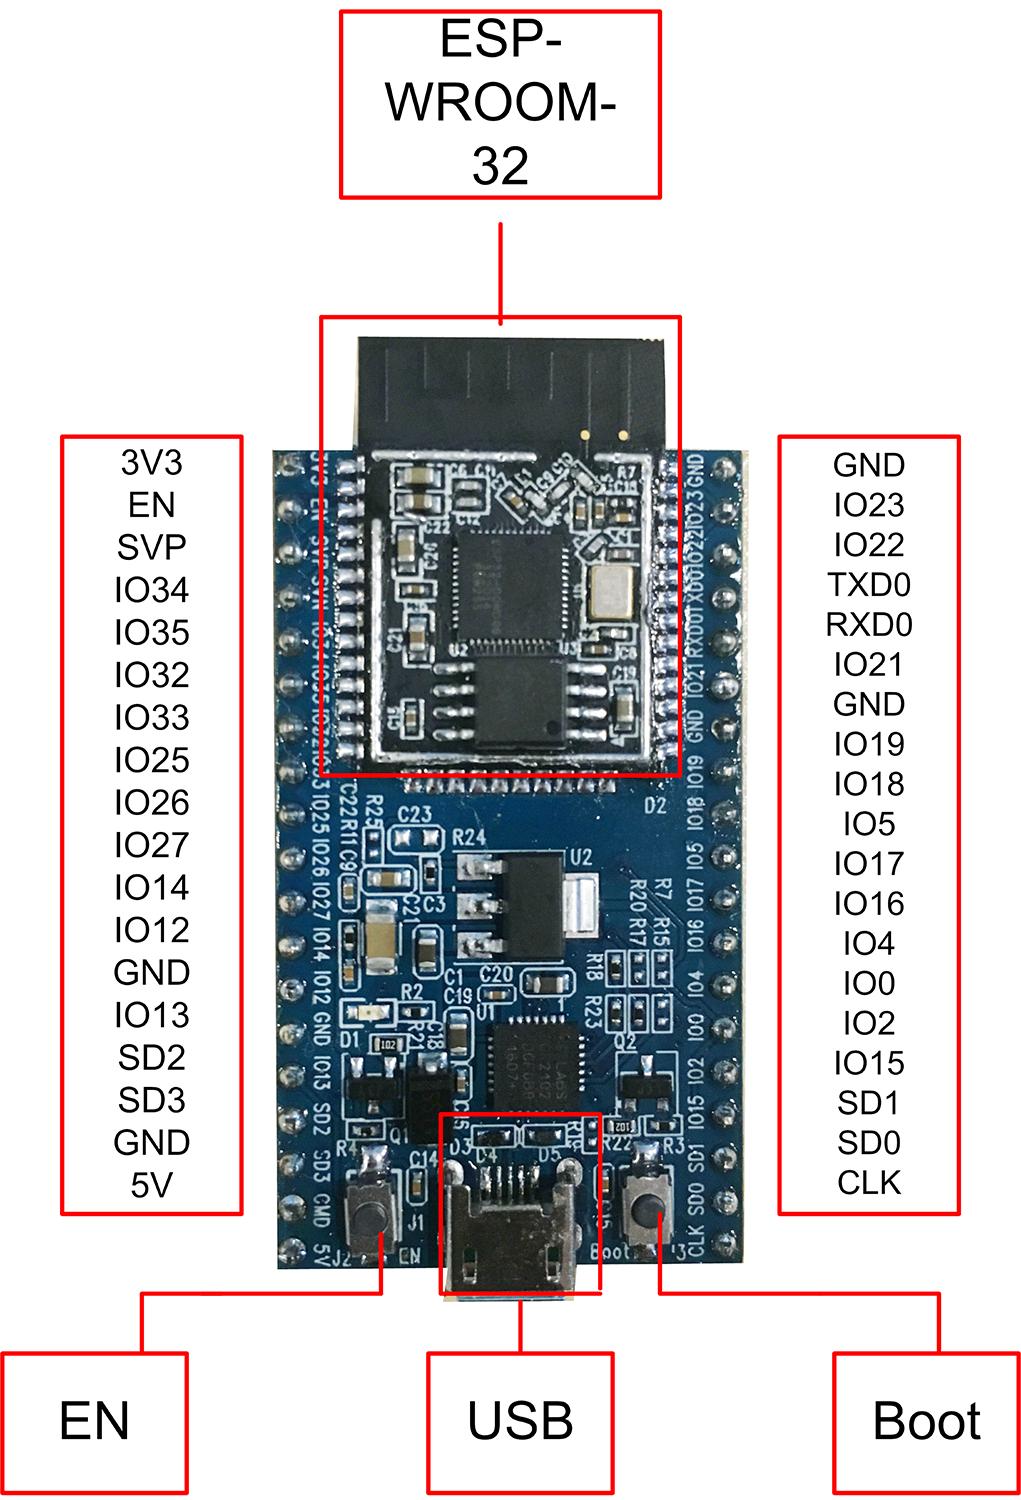 DISTRIBUTED BY TEXIM EUROPE 1. 1. Overview Overview ESP32-DevKitC is a small sized ESP32-based development board developed by Espressif.